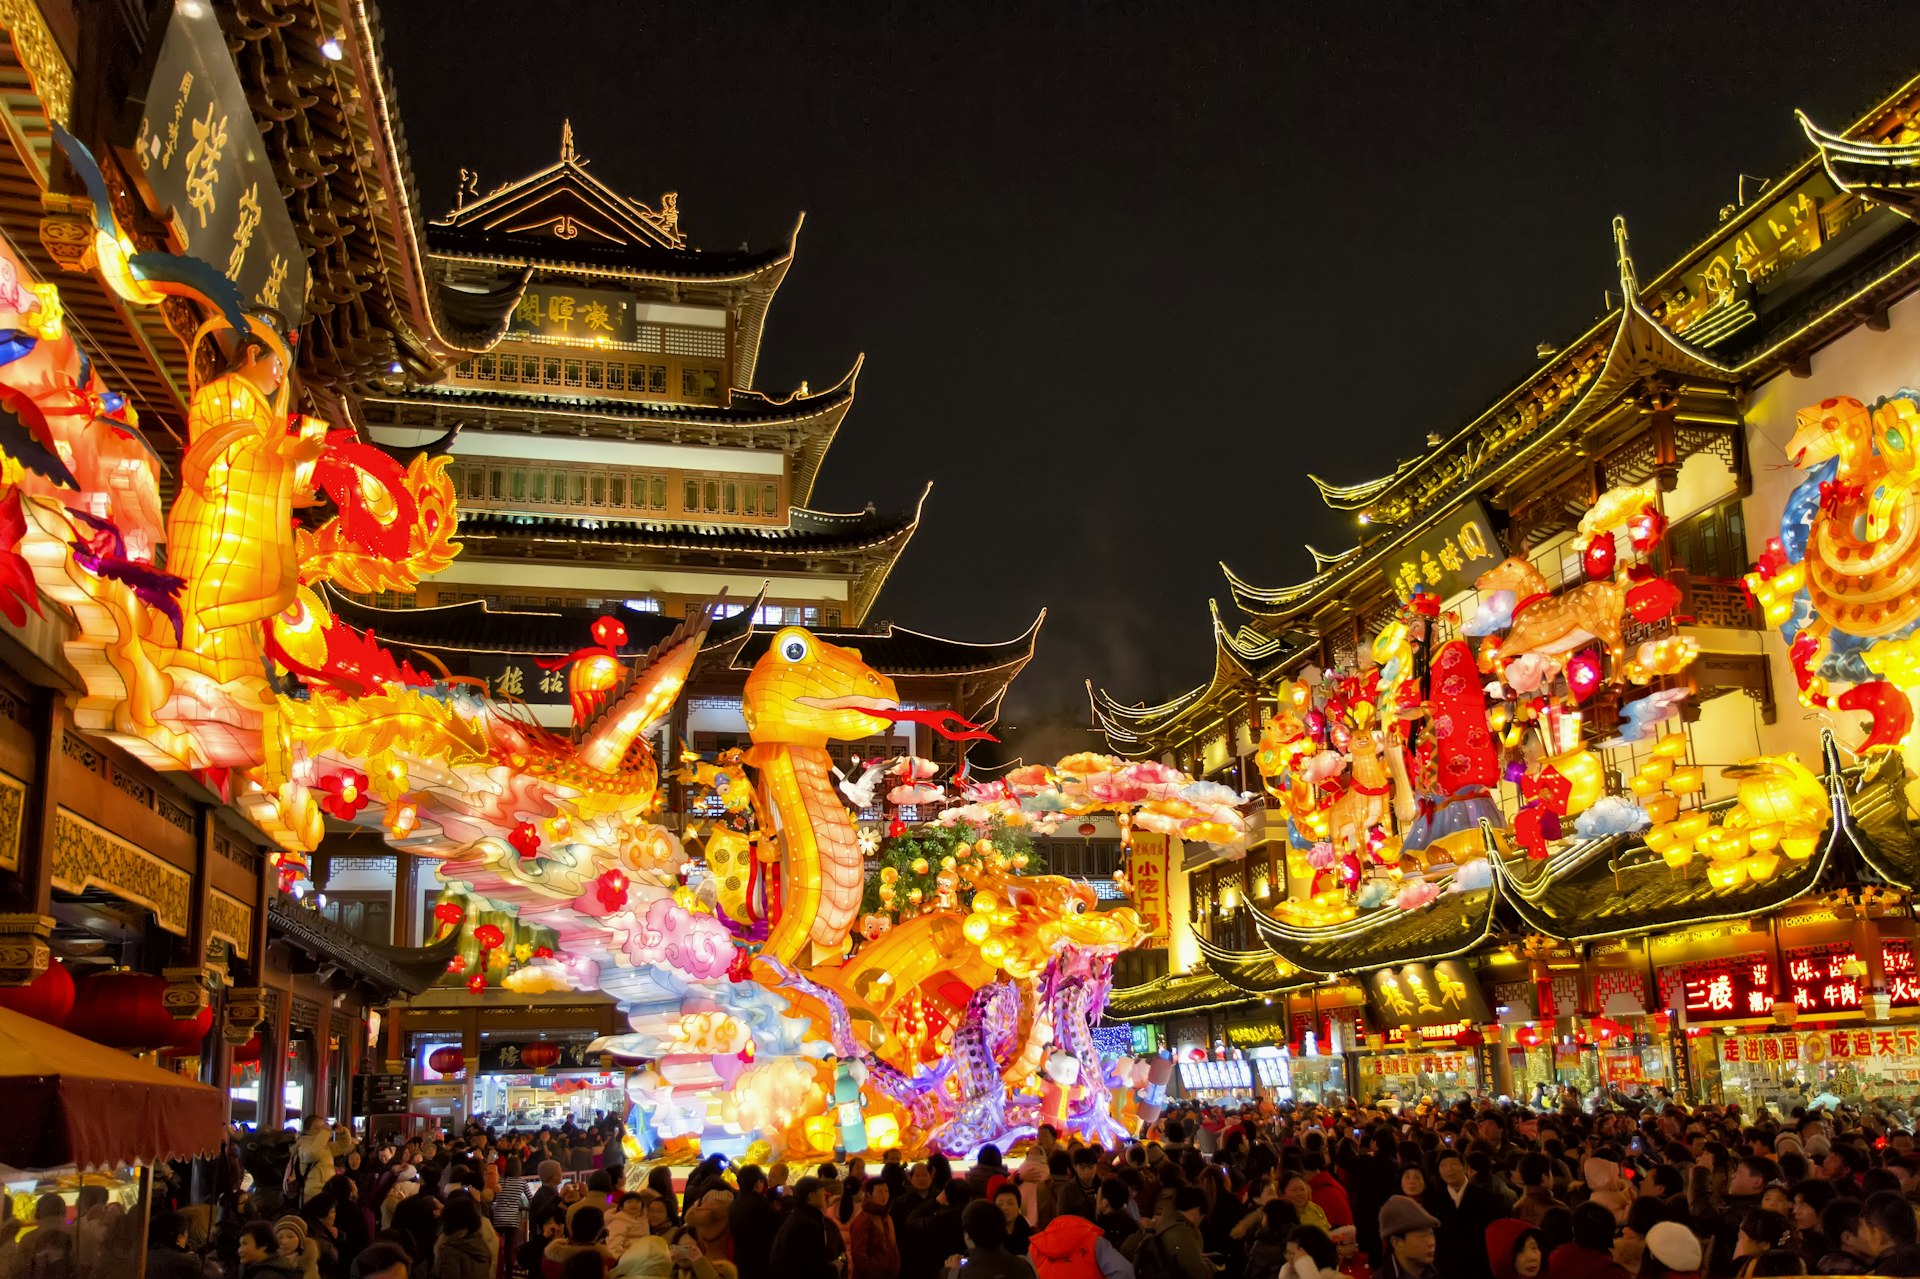 Huge illuminated lanterns of snakes in front of pagodas at night, with crowds of people underneath